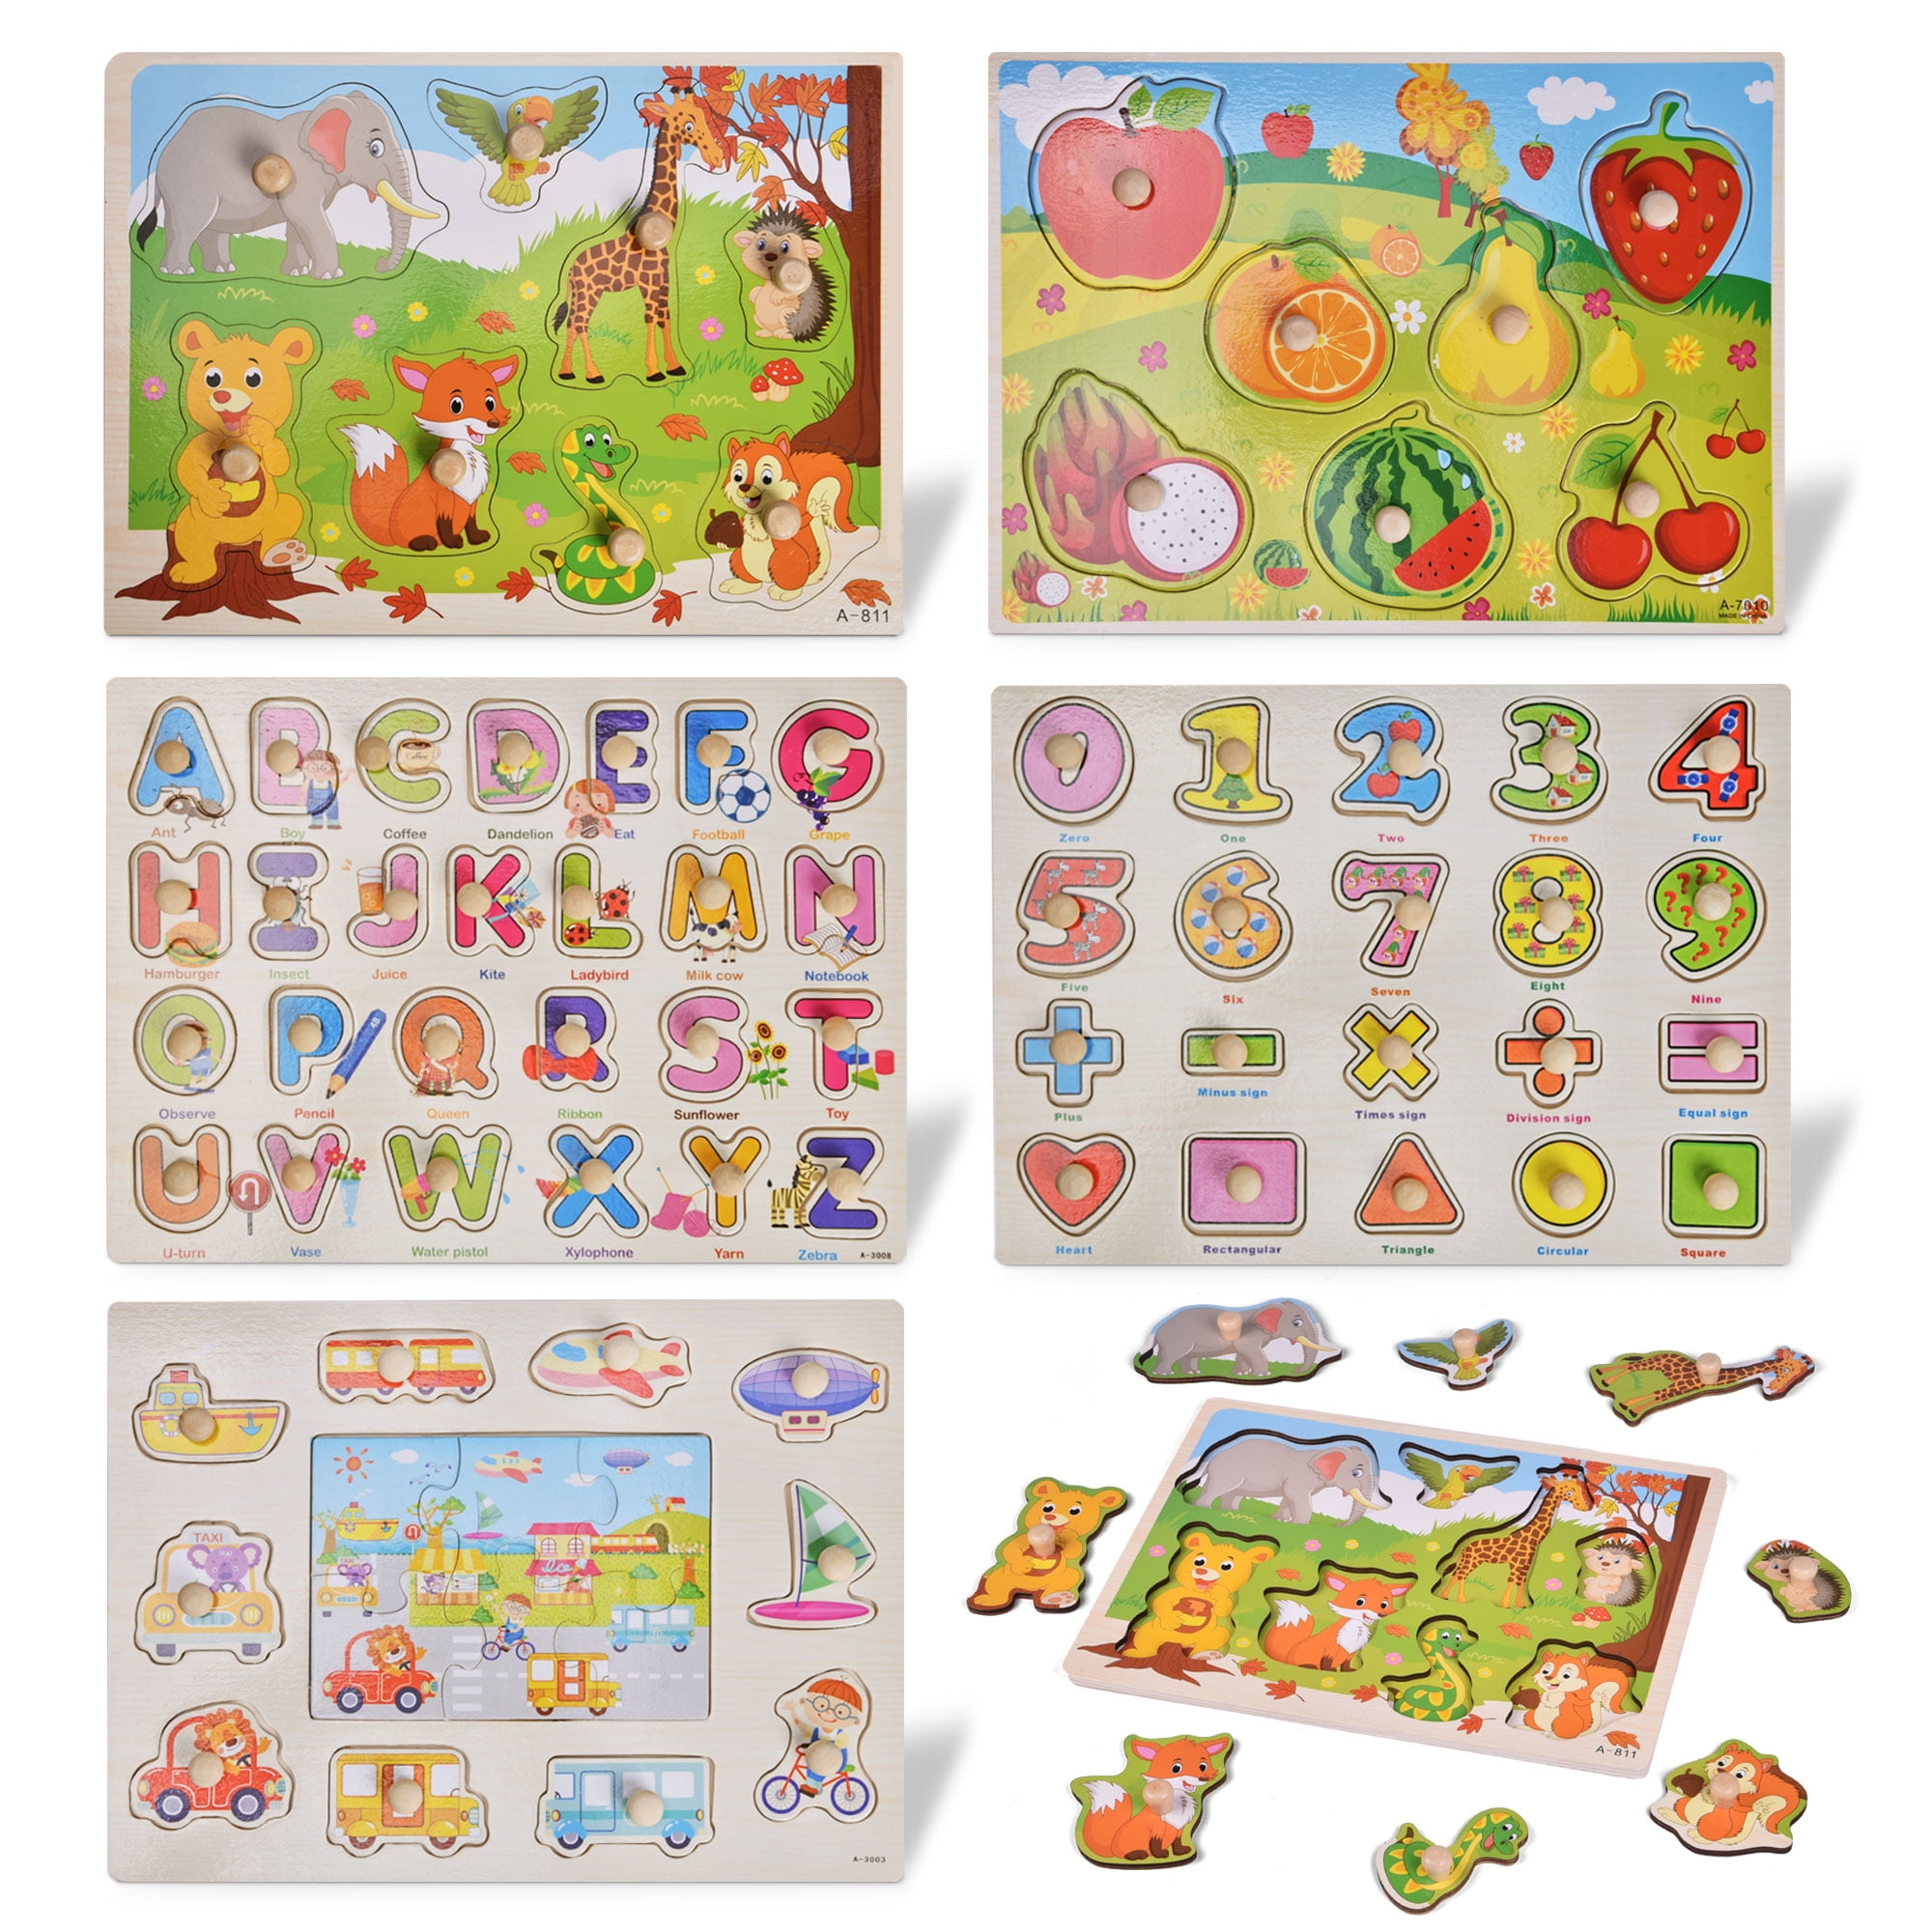 20 pieces Wooden Puzzle Jigsaw Toddler Kid Early Learning Educational Toy Monkey 